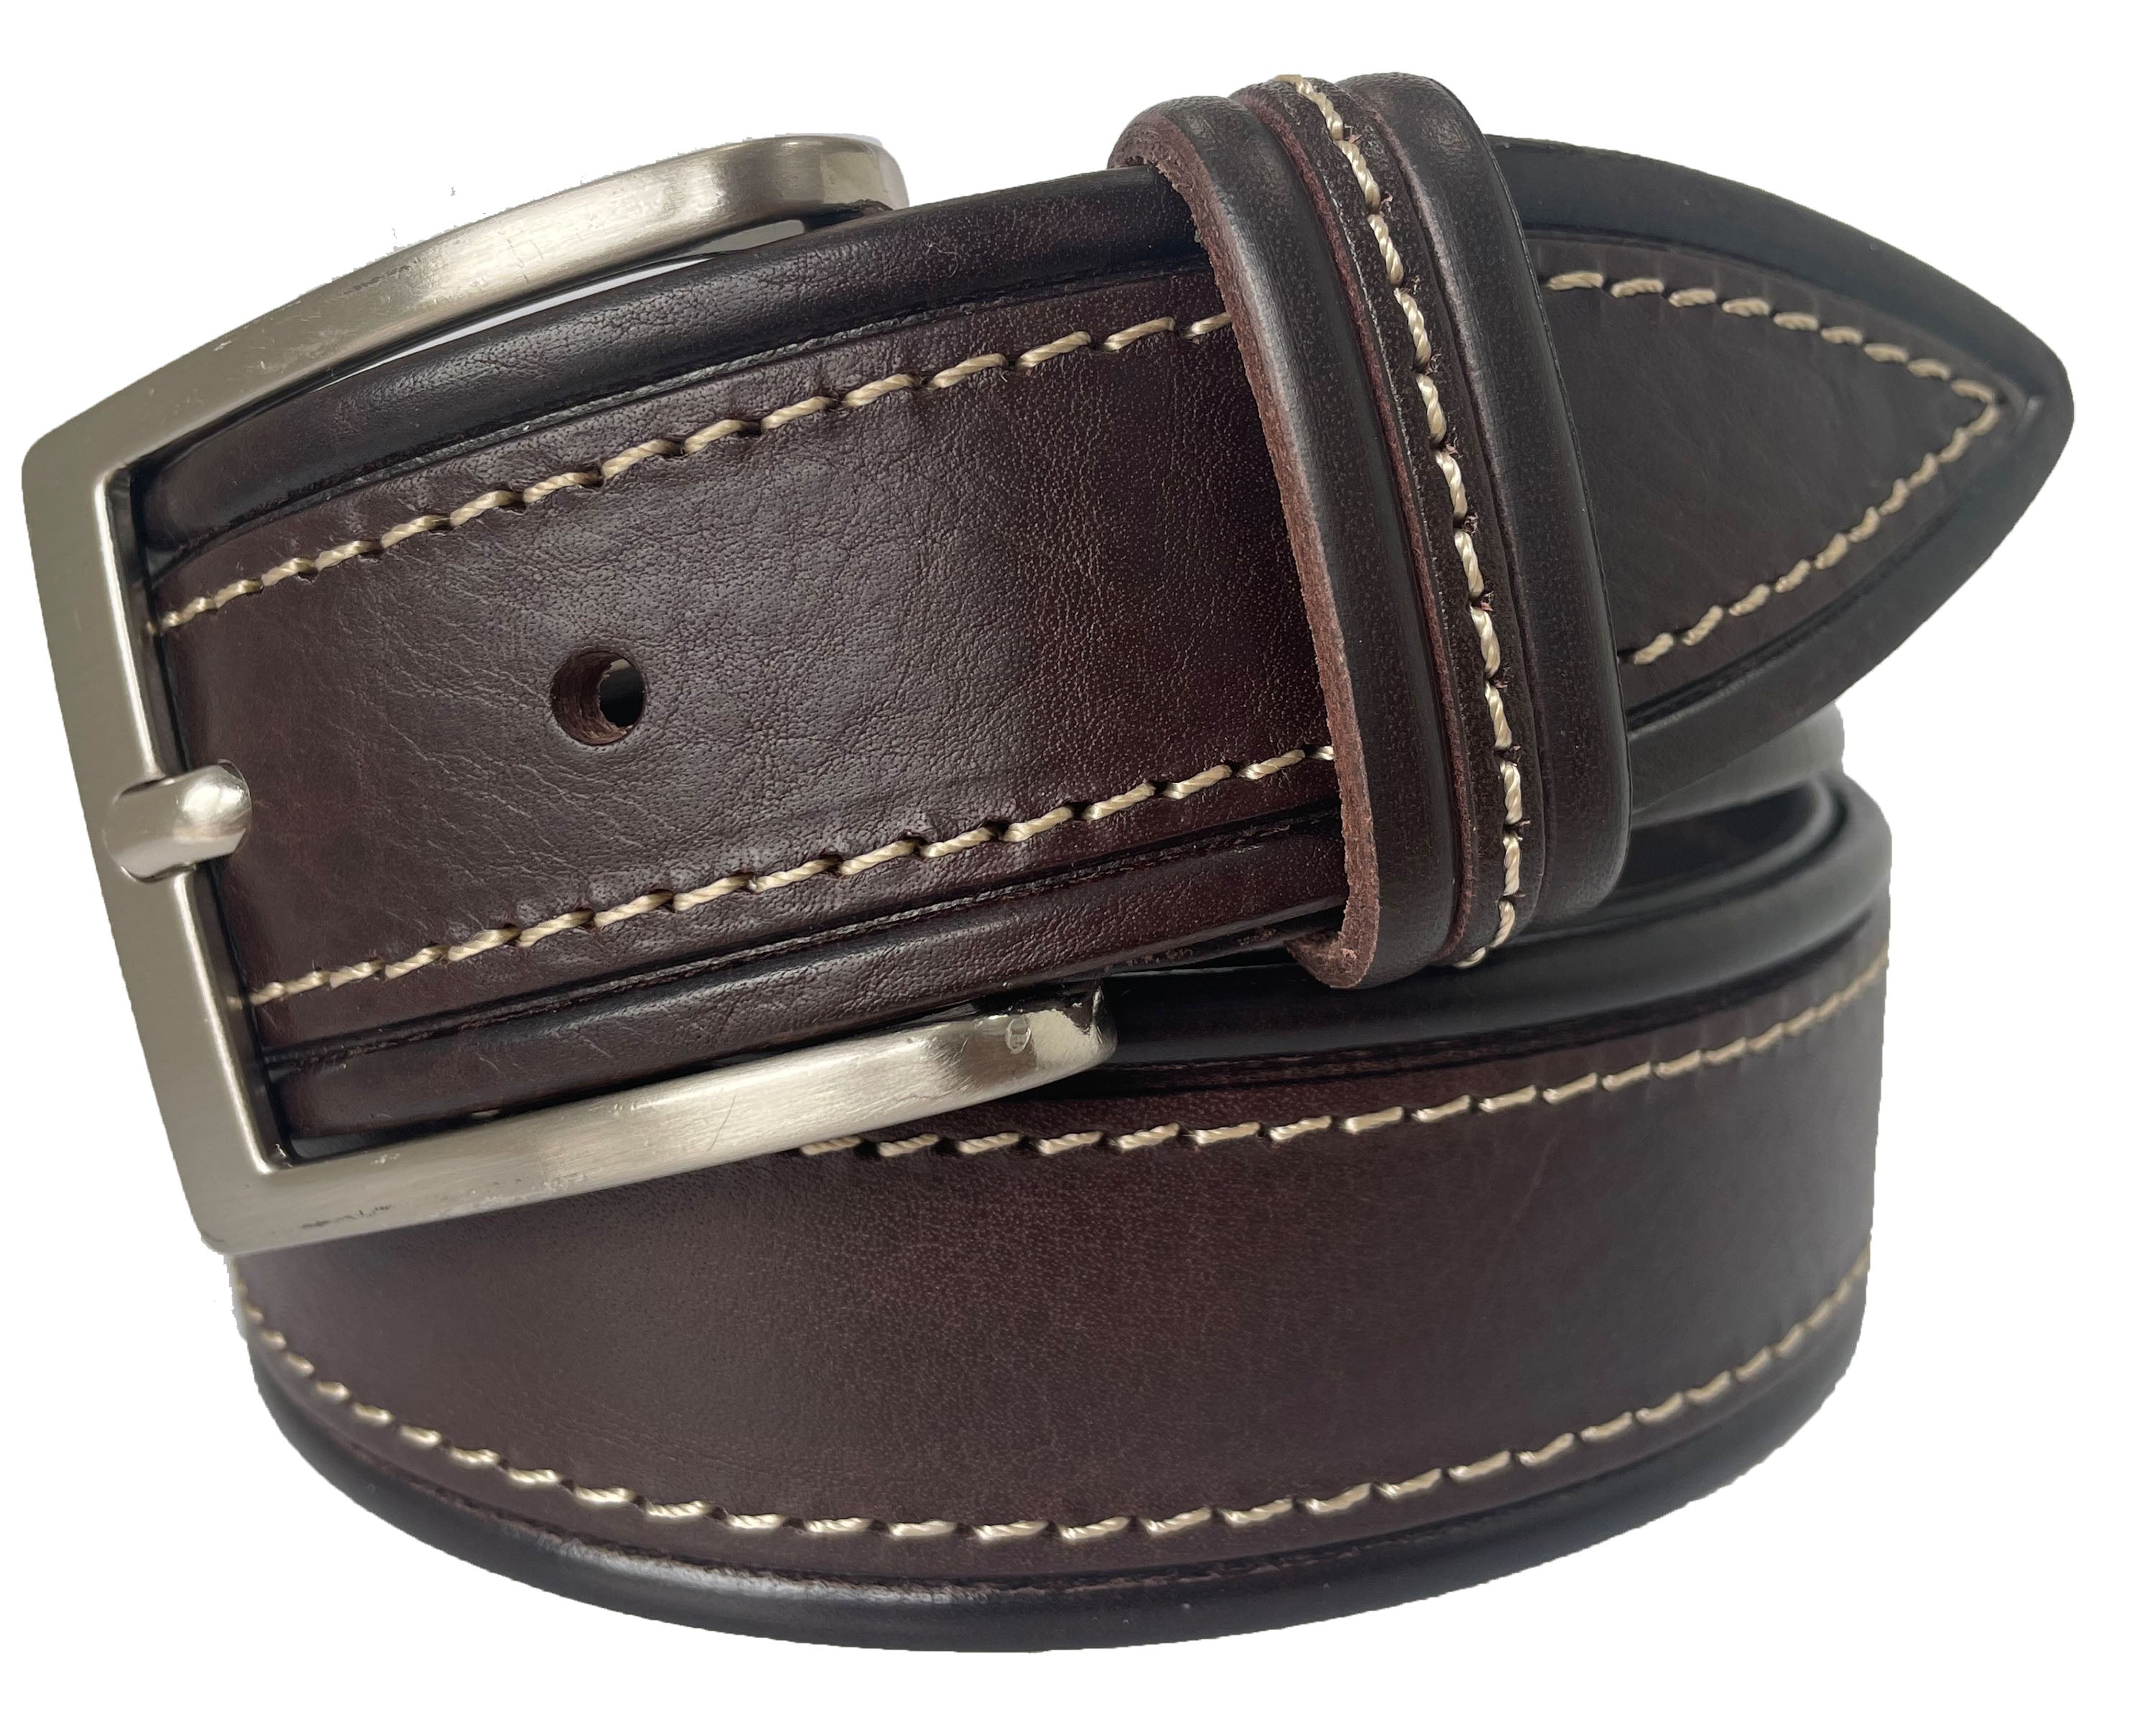 RICH BROWN TAPERED TIP CREAM STITCHED LEATHER BELT